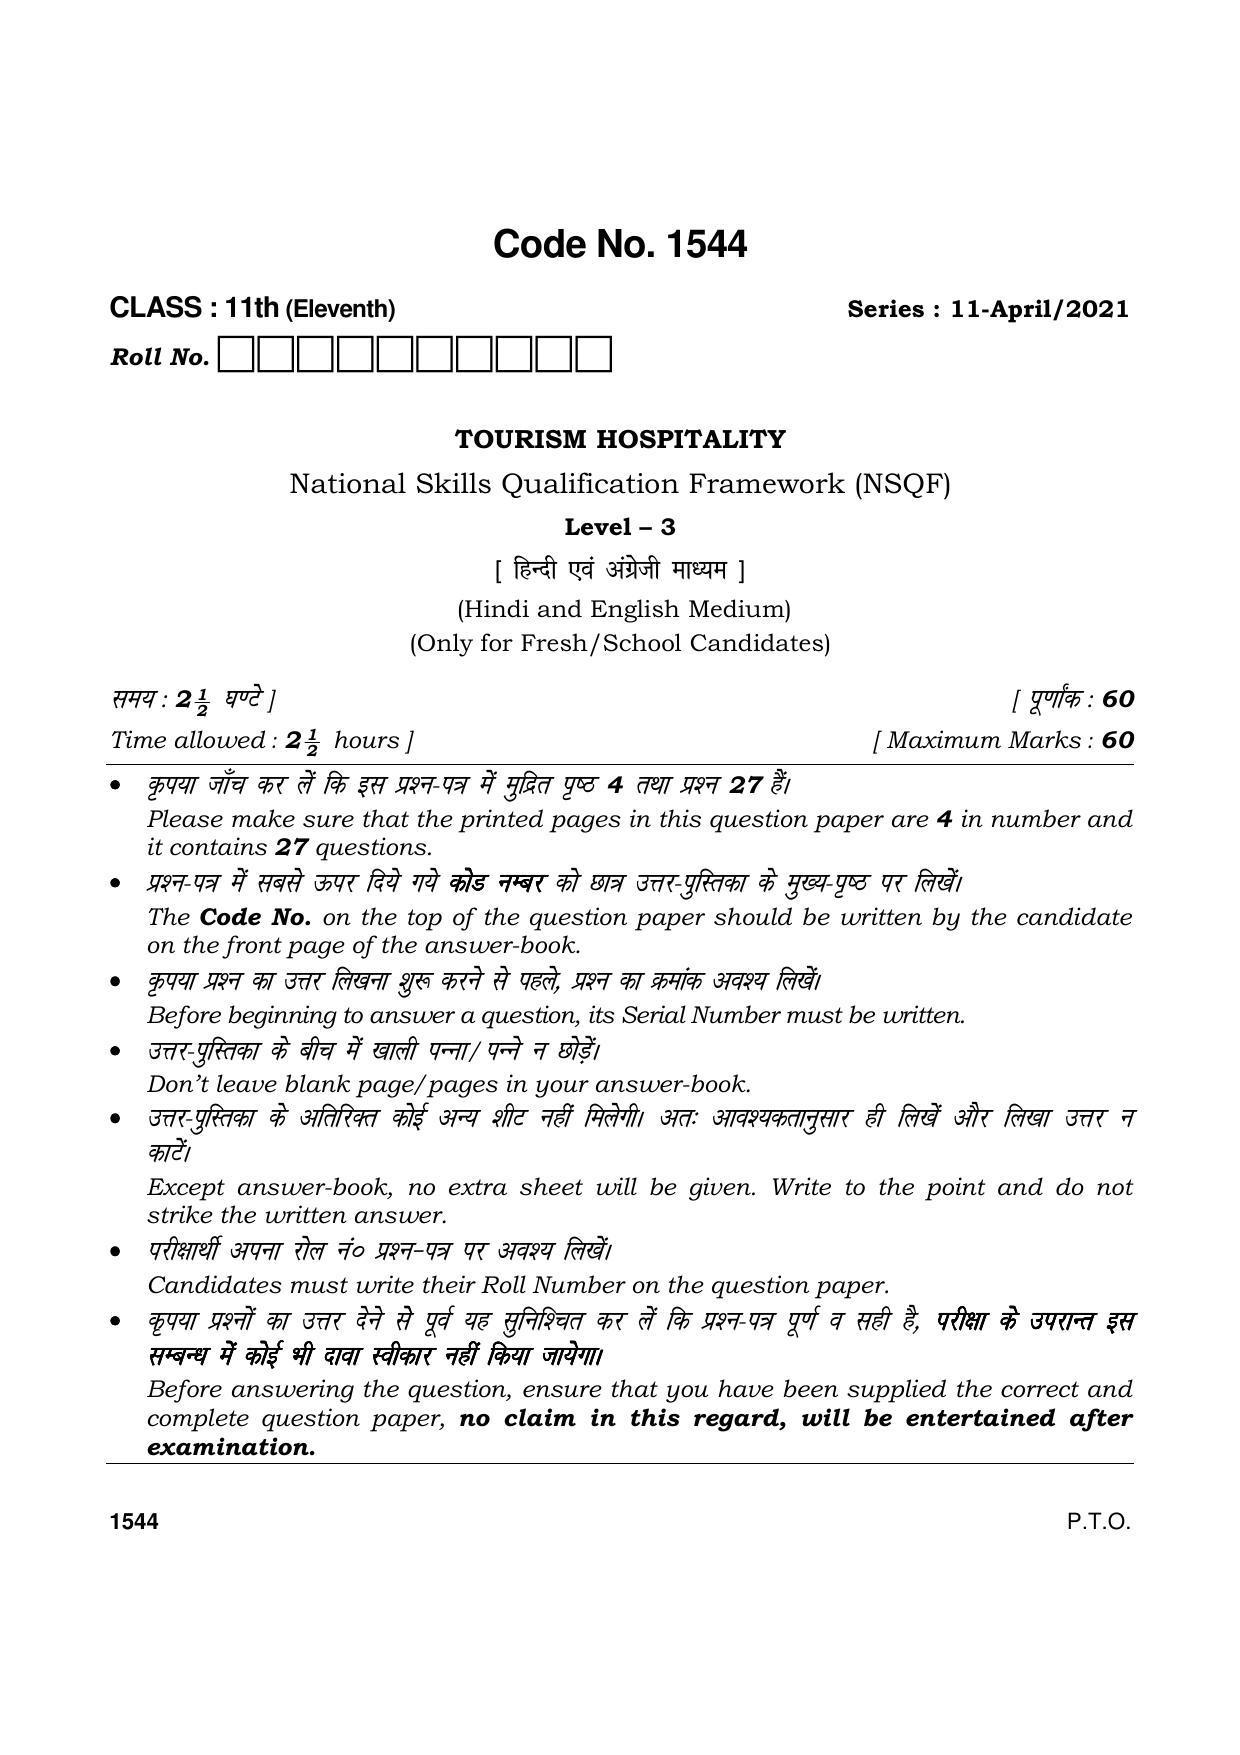 Haryana Board HBSE Class 11 Tourism Hospitality 2021 Question Paper - Page 1